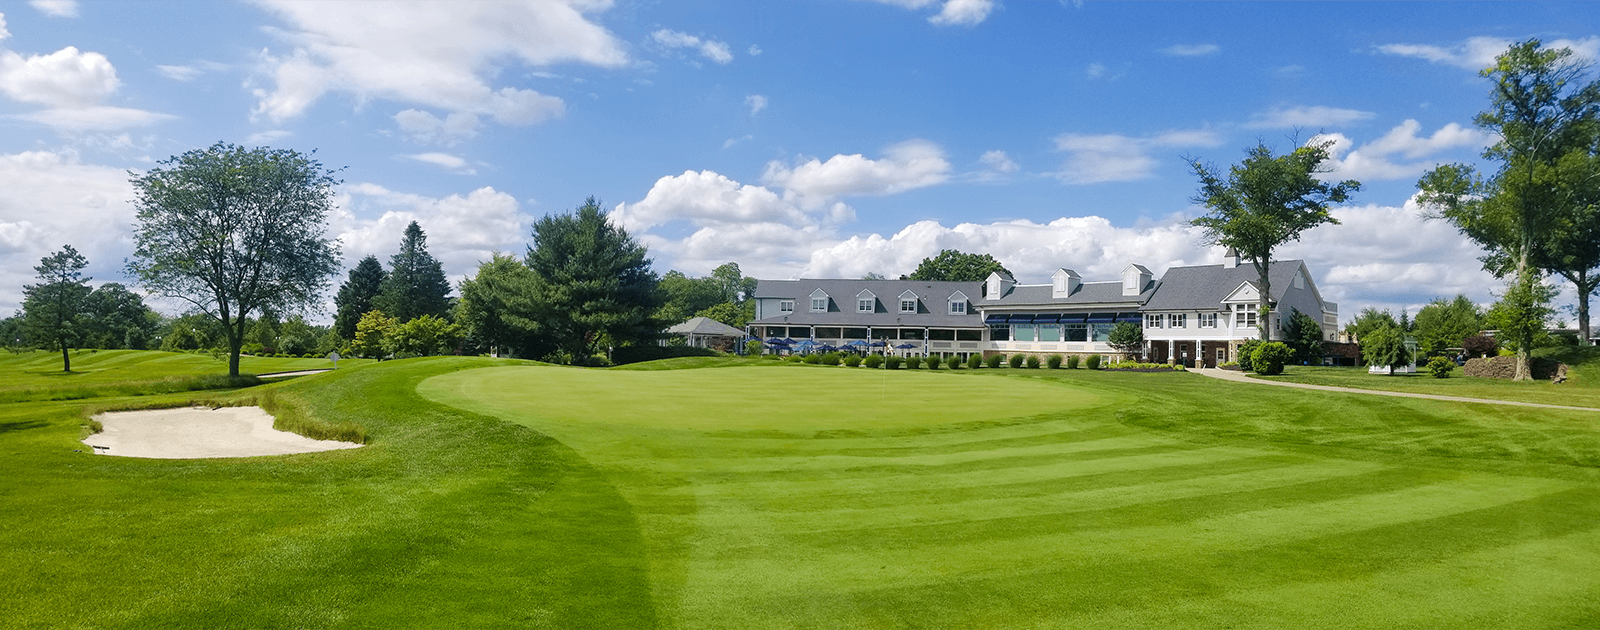 A Monmouth Country private club